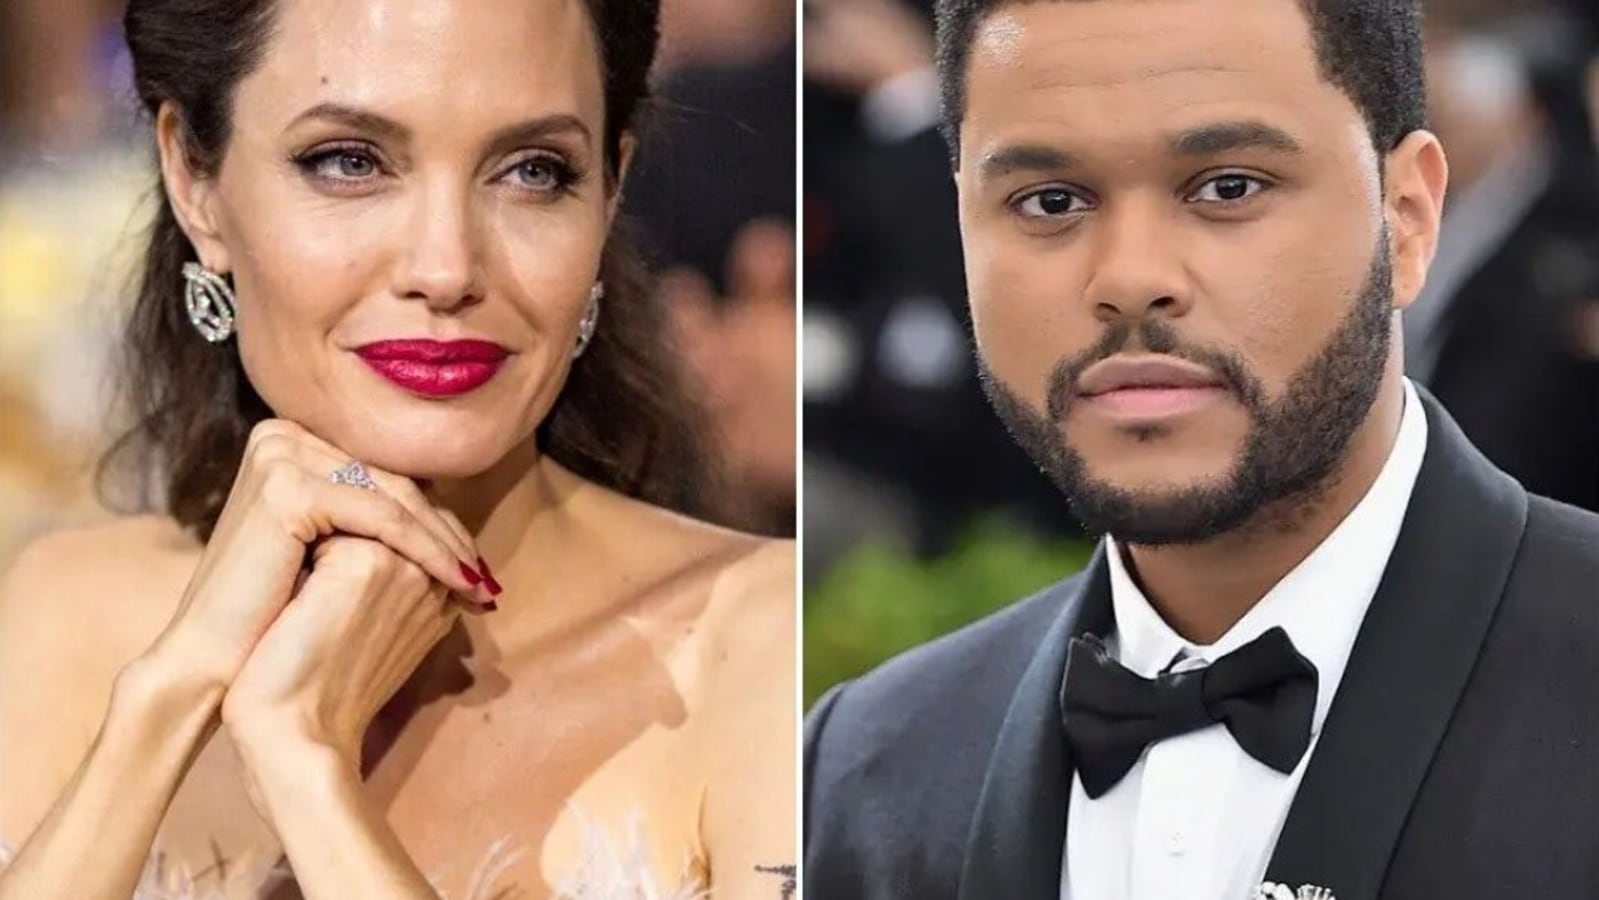 Angelina Jolie, The Weeknd seen together in LA, fuel dating rumours. See  pics inside | Hollywood - Hindustan Times